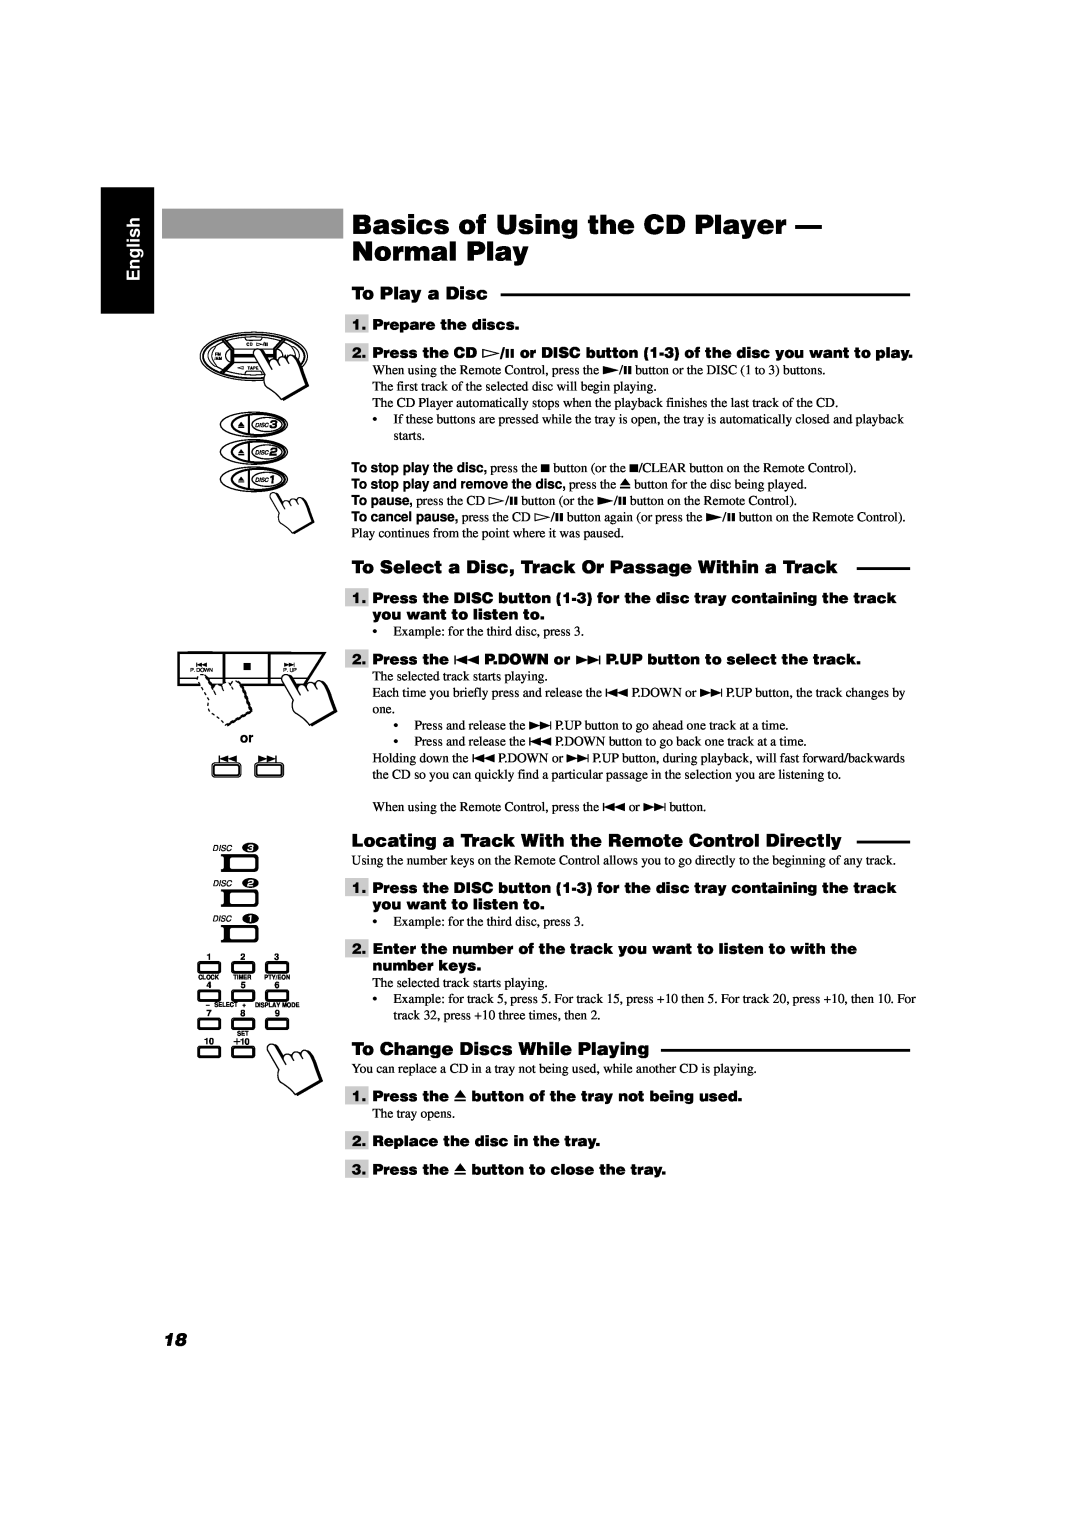 JVC CA-D351TR manual Basics of Using the CD Player - Normal Play, To Play a Disc, To Change Discs While Playing, English 